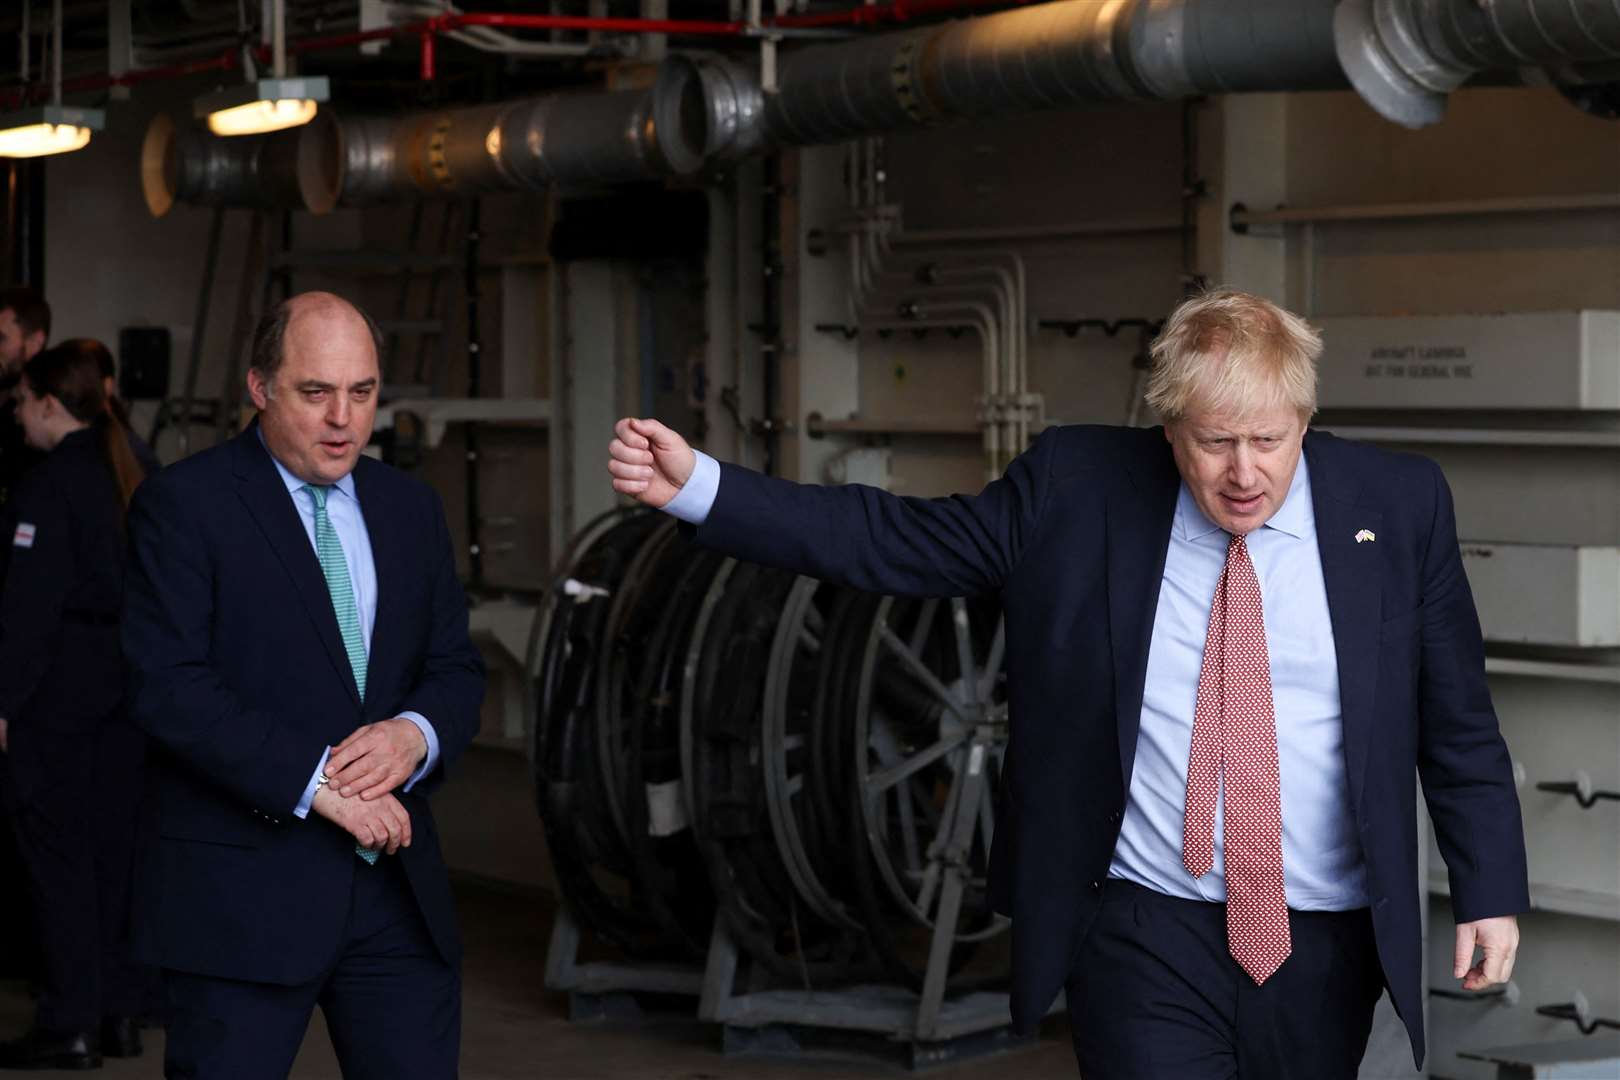 Prime Minister Boris Johnson and Defence Secretary Ben Wallace on board HMS Dauntless in March (Phil Noble/PA)